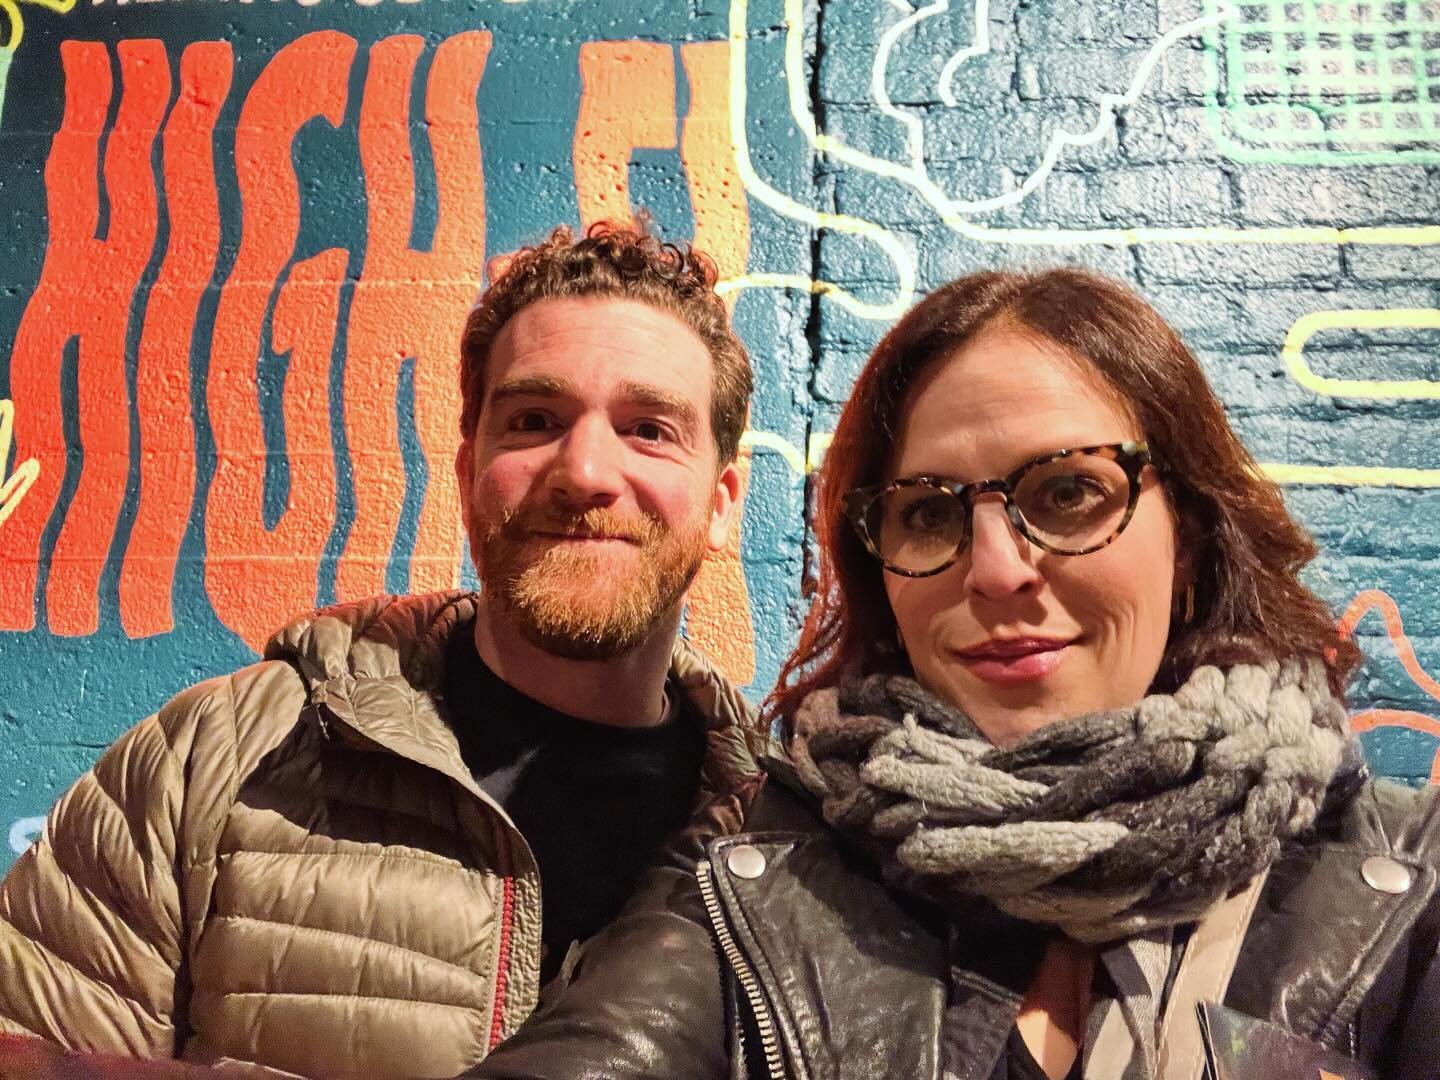 Date night in #chitown @blackpumas.official @the_dipstagram at the @saltshedchicago. That bathroom wallpaper tops the list! (After the music, obviously)